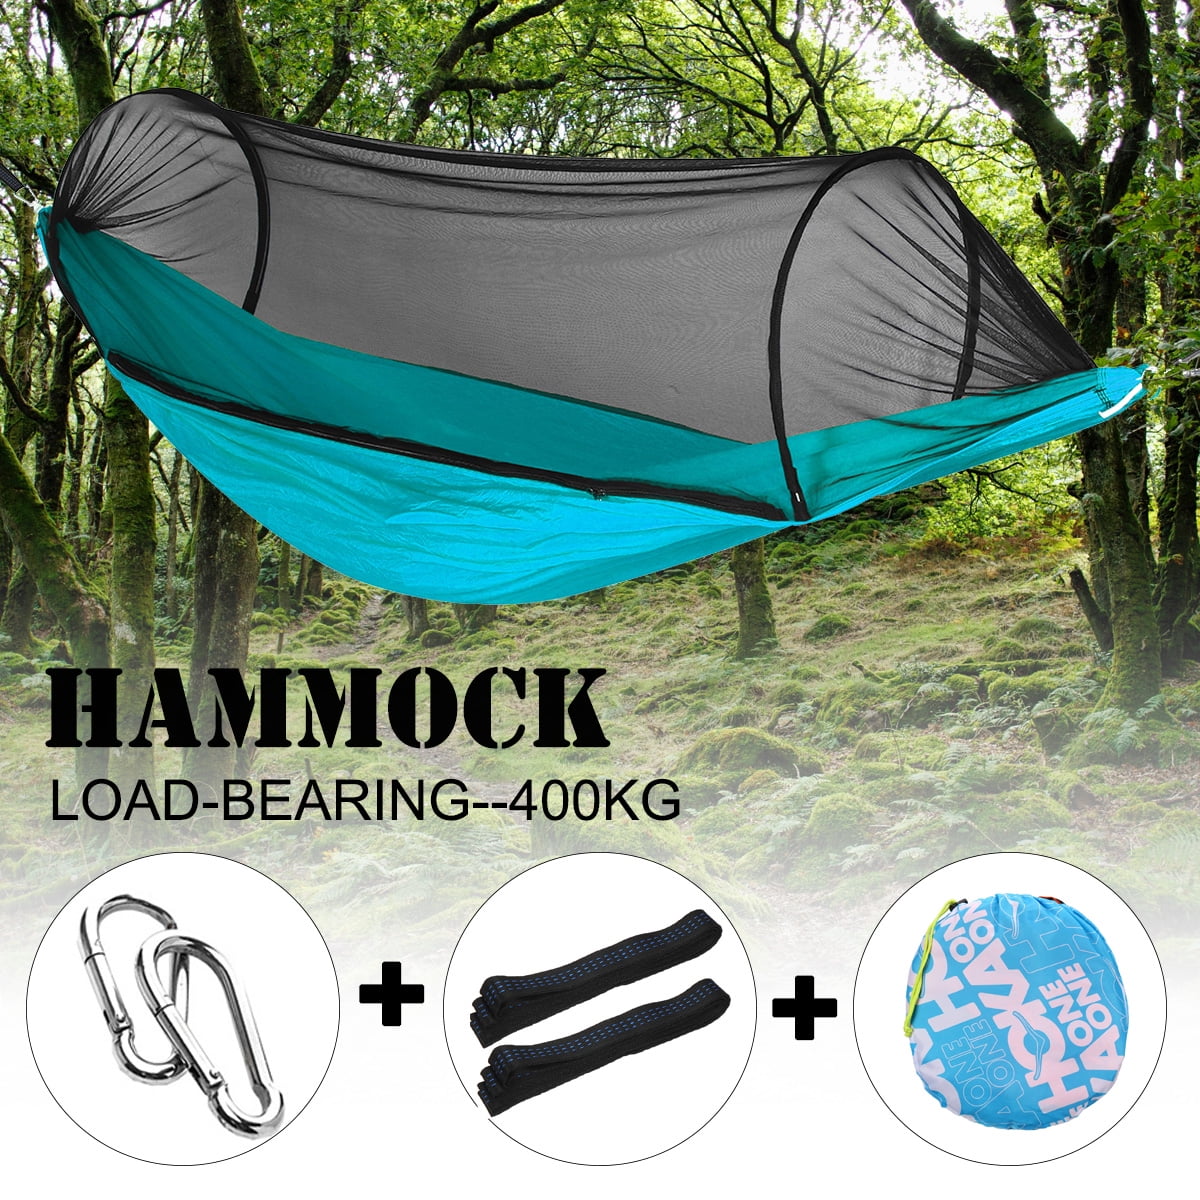 Camping Hammock Tent Mosquito Net Set Outdoor Double Hanging Bed Swing Chair USA